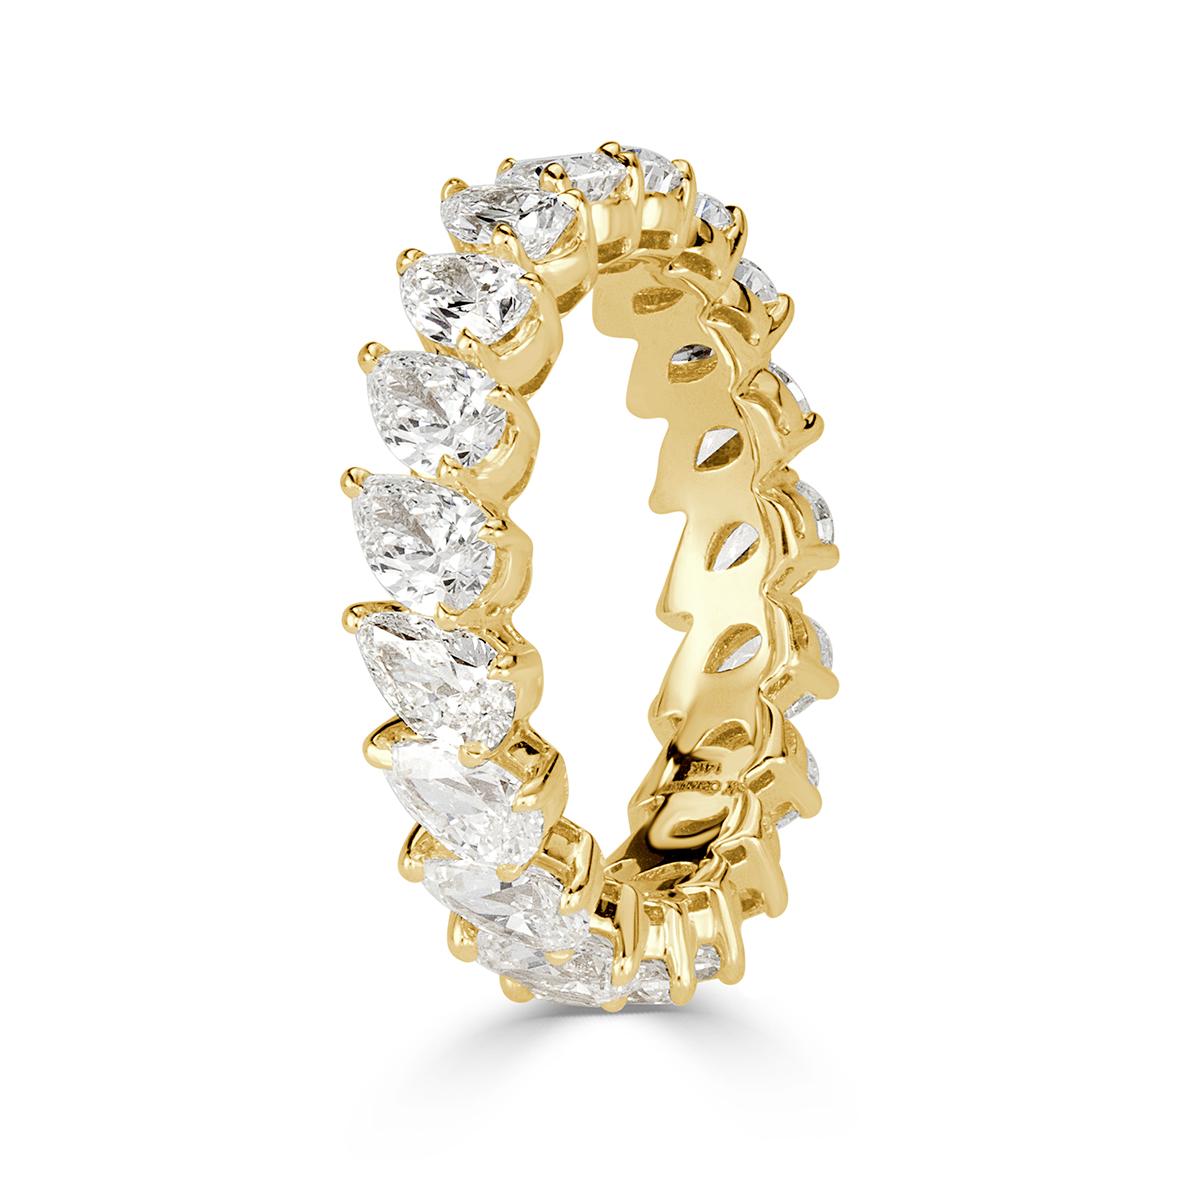 Custom created in 18k yellow gold, this stunning diamond eternity band showcases a 3.65ct of pear shaped diamonds graded at E-F in color, VS1-VS2 in clarity. They are each hand selected and matched with the utmost care. Absolutely stunning from